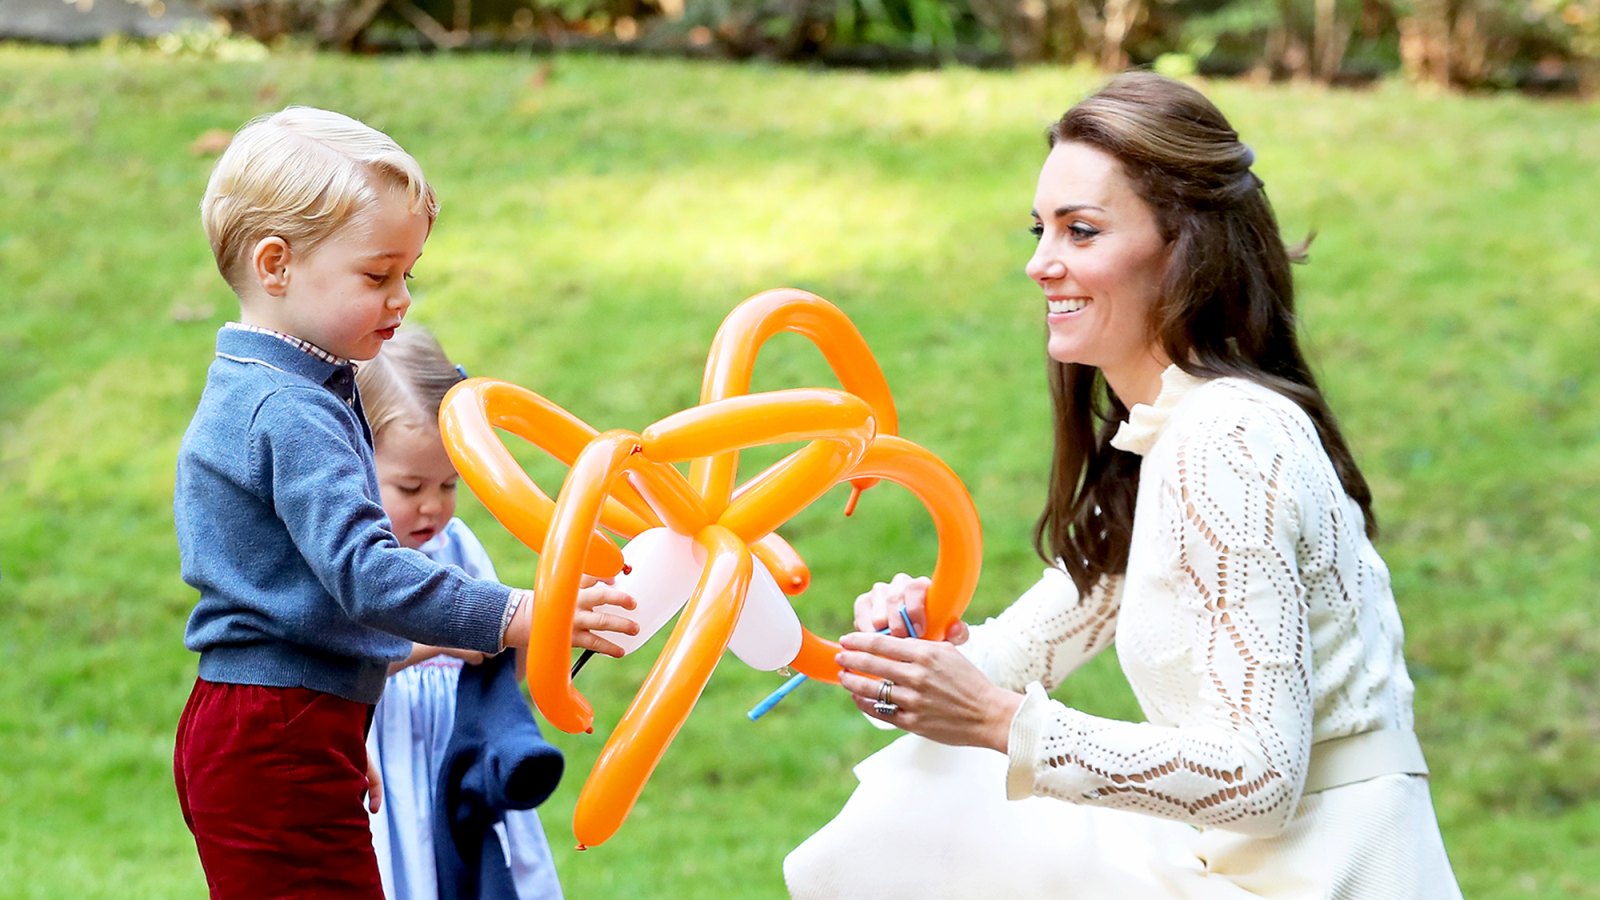 Kate Middleton with Princess Charlotte and Prince George at a children's party for Military families during the 2016 Royal Tour of Canada in Victoria, Canada.